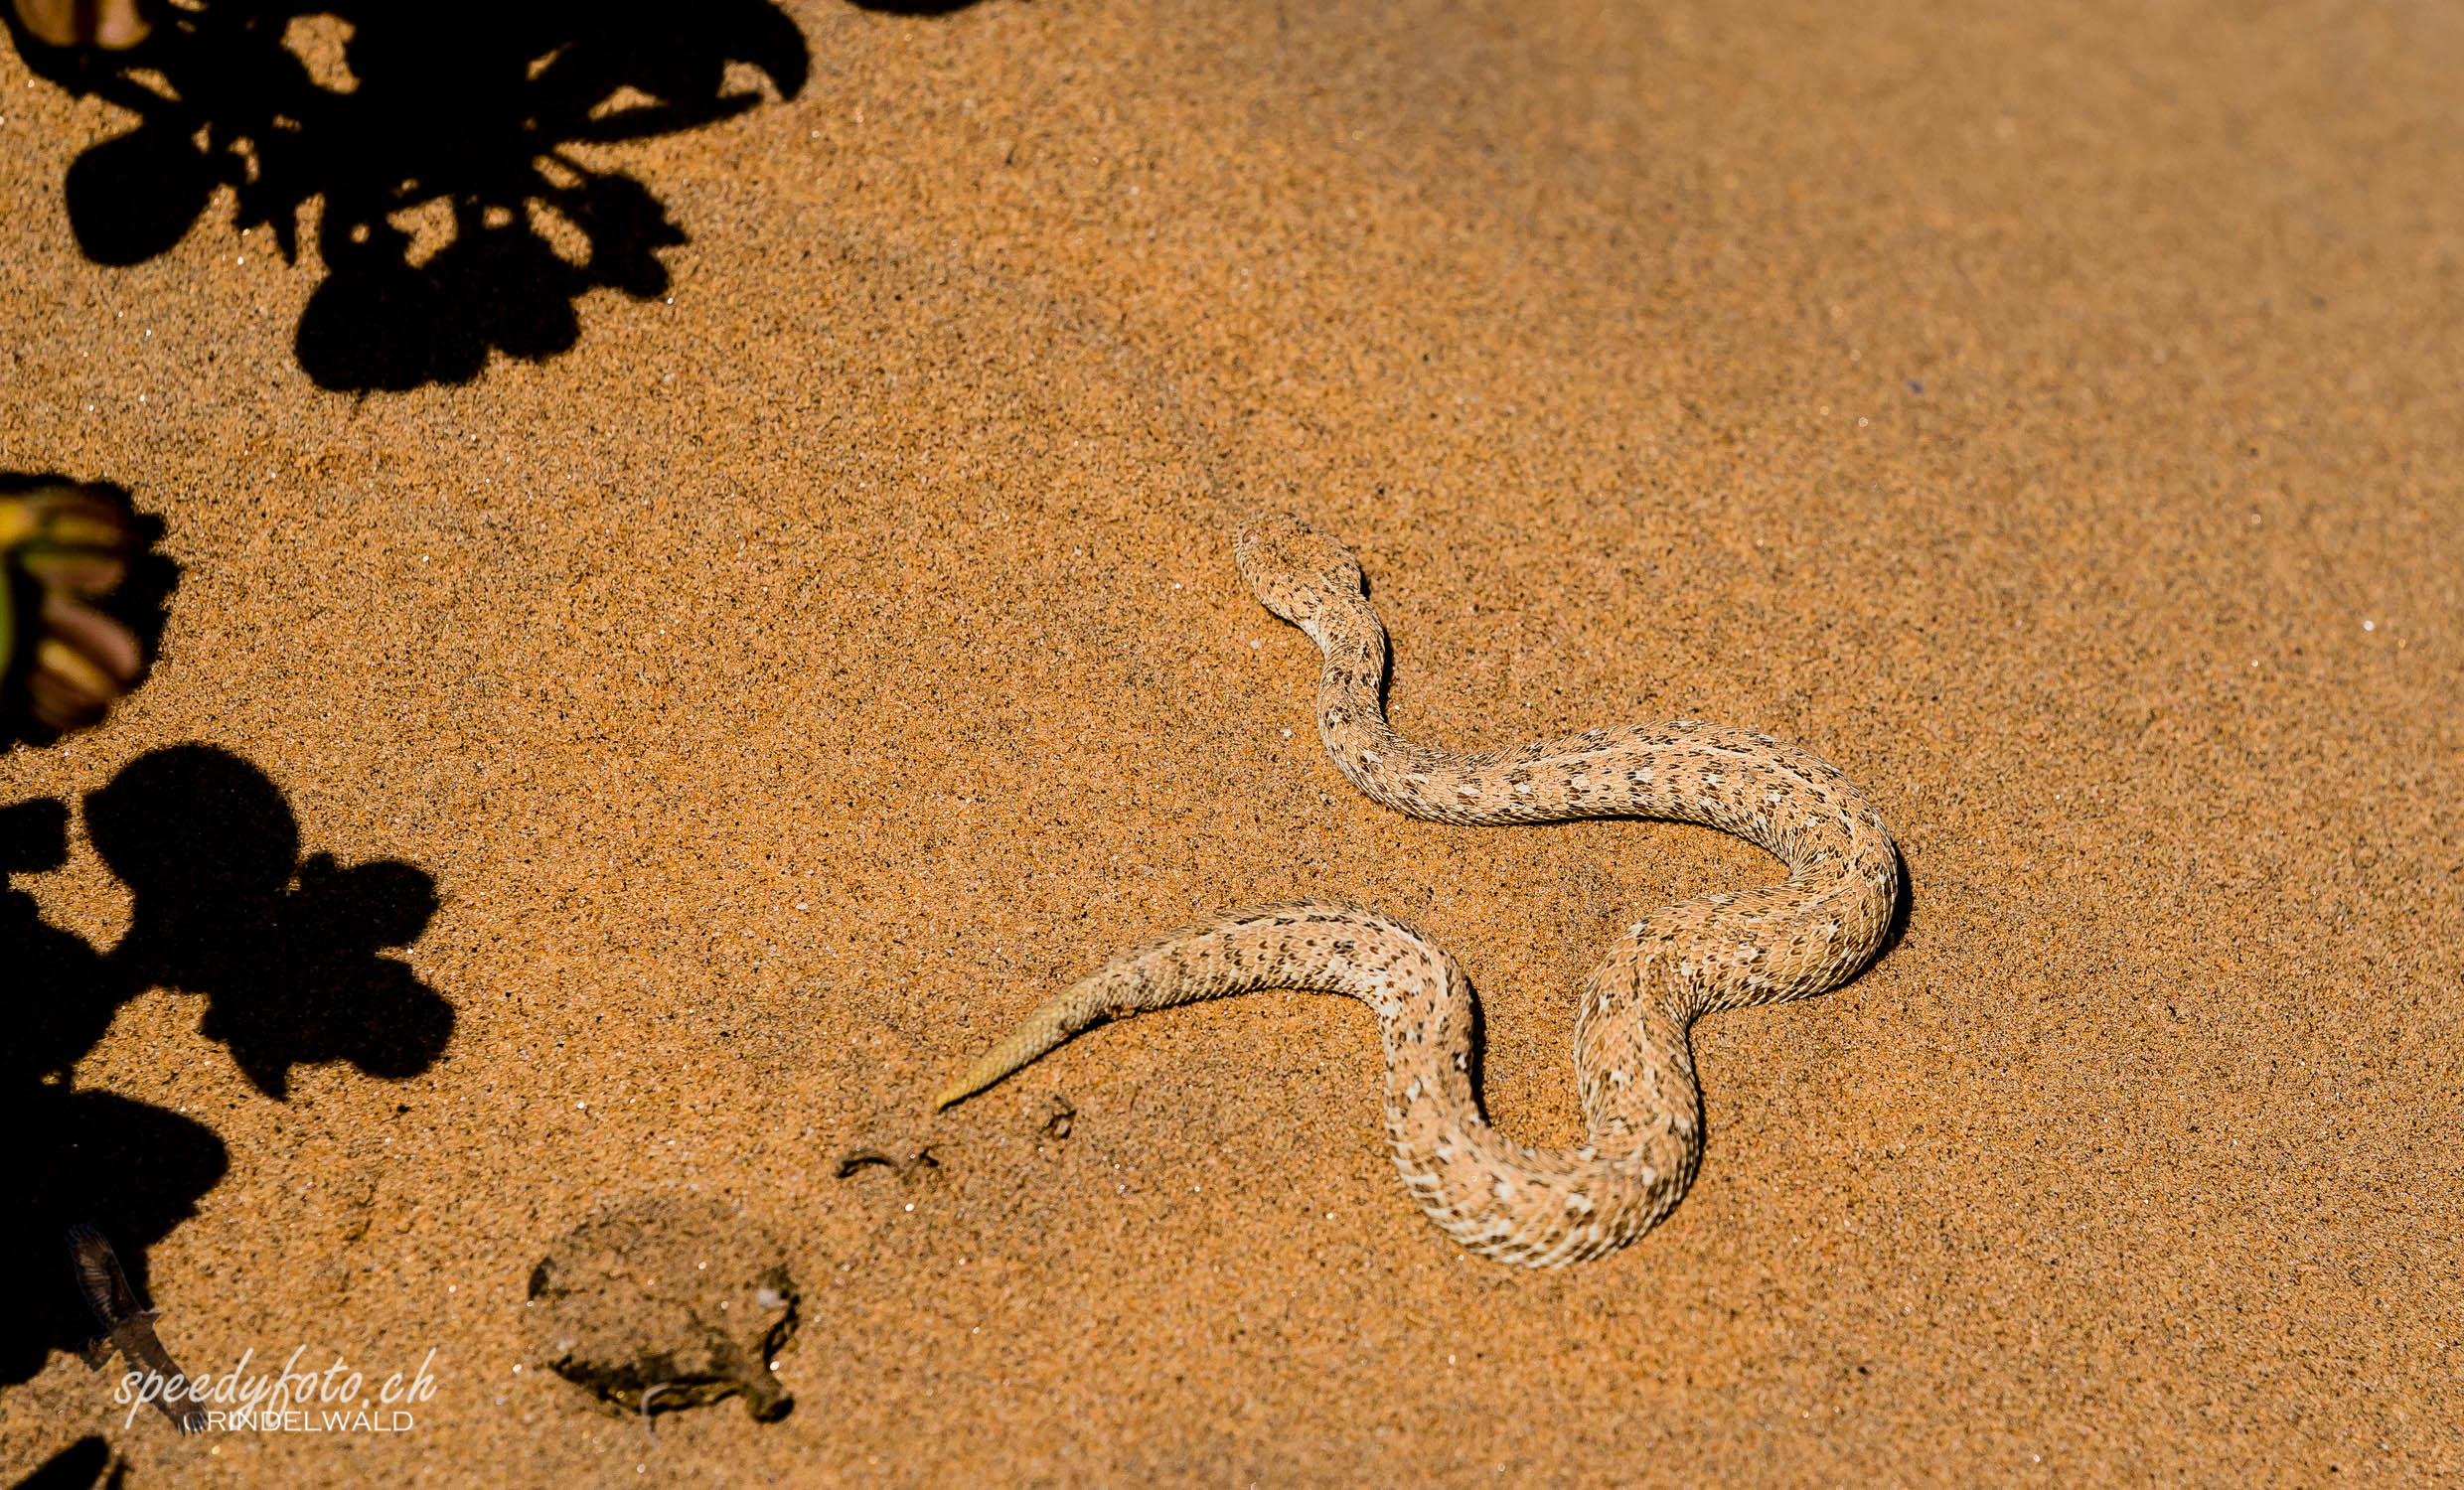 The Snake in the Dunes 